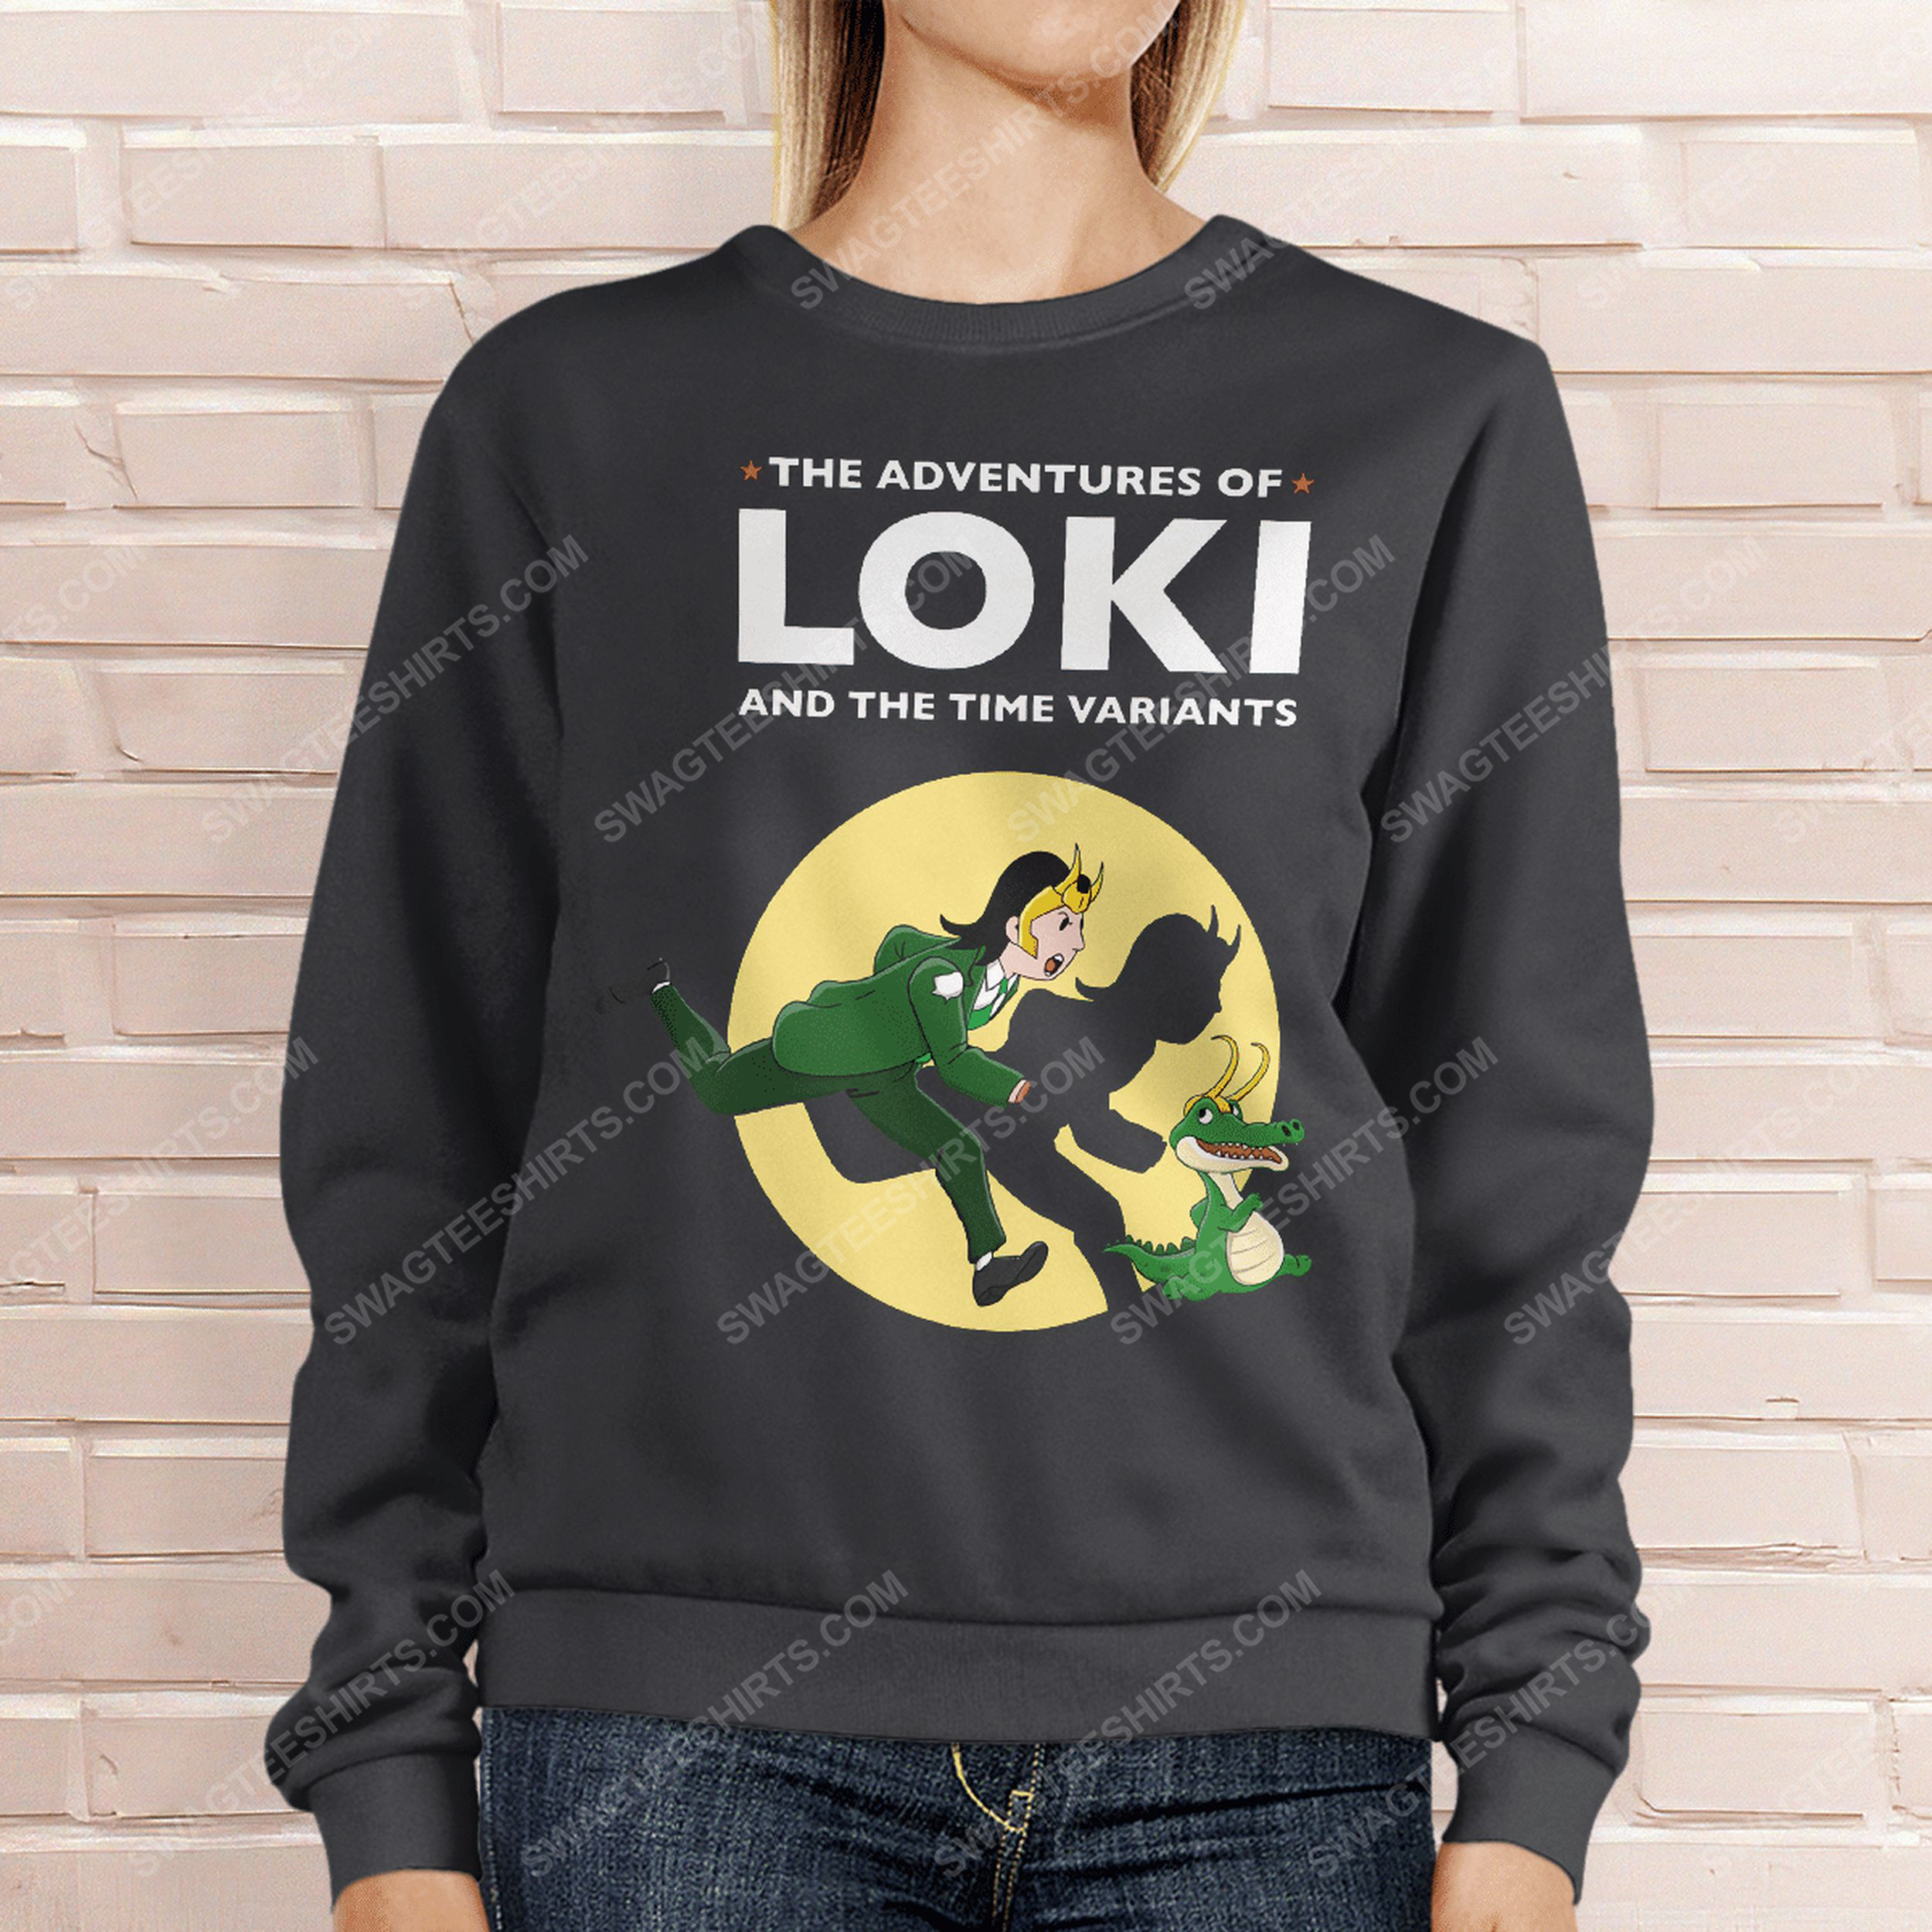 The adventures of loki and the time variants sweatshirt 1(1)